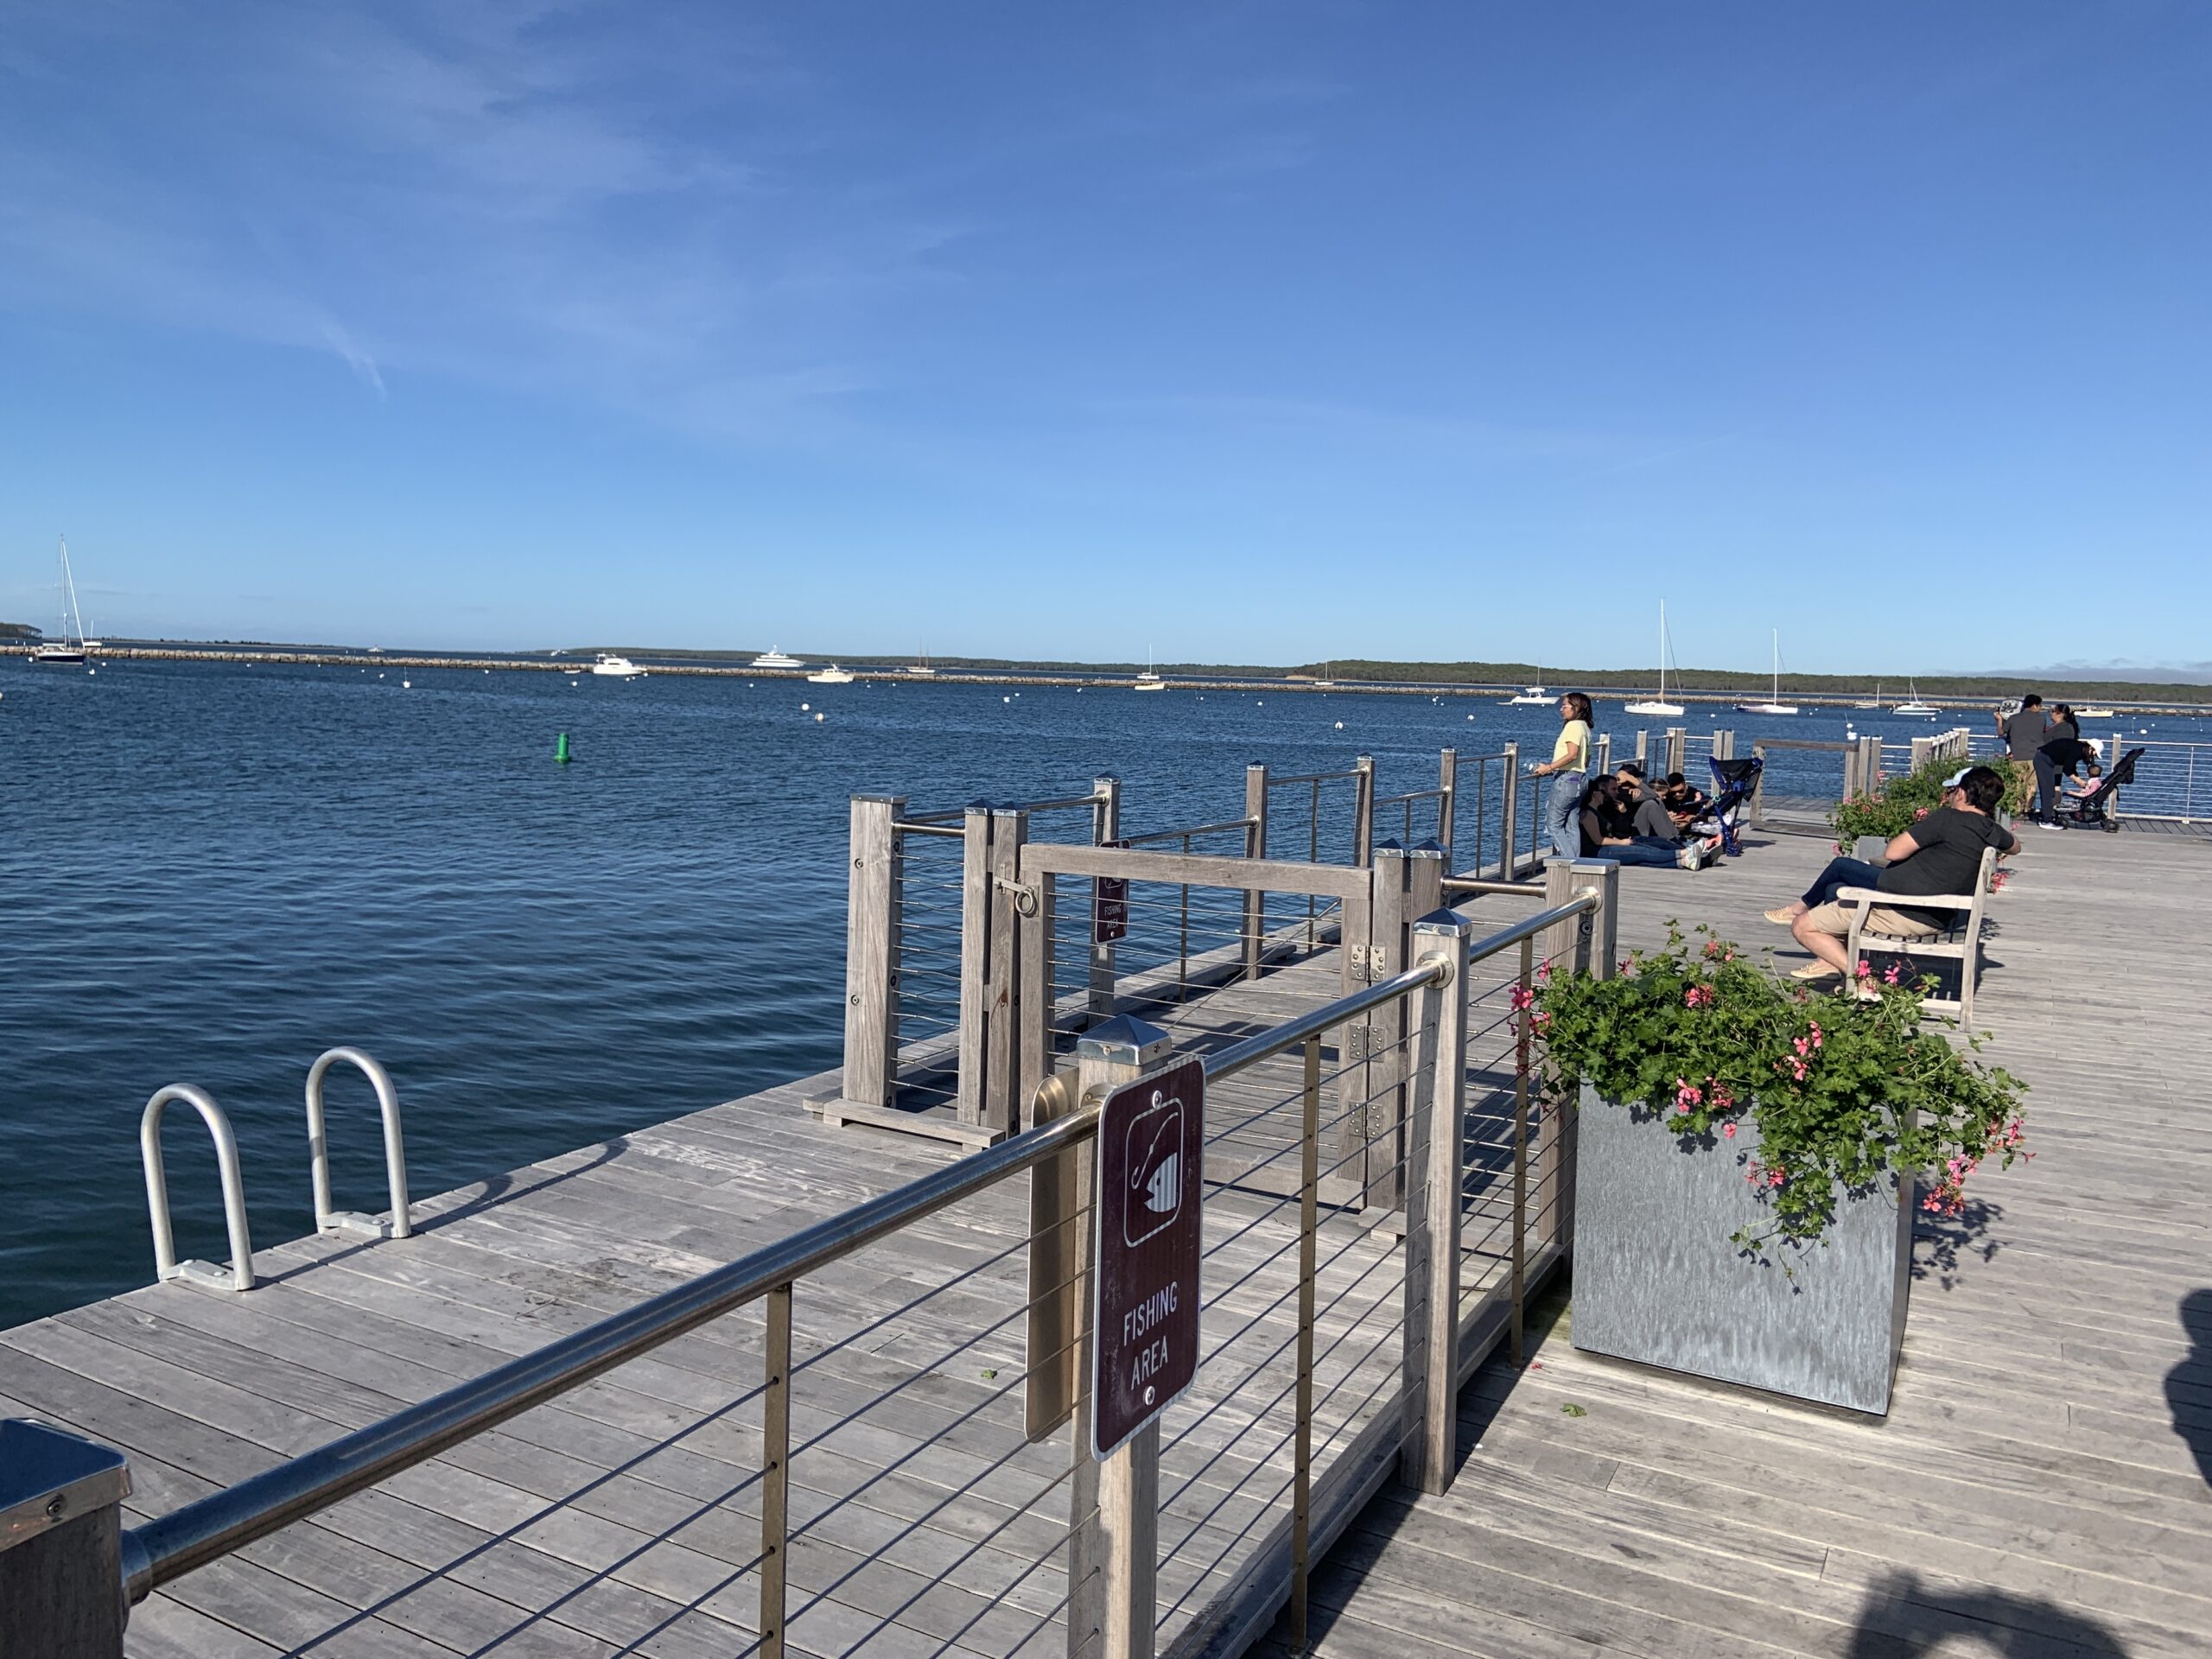 The Peconic Jitney would dock at the northwest corner of Long Wharf, in an area designed for fishing.  STEPHEN J. KOTZ